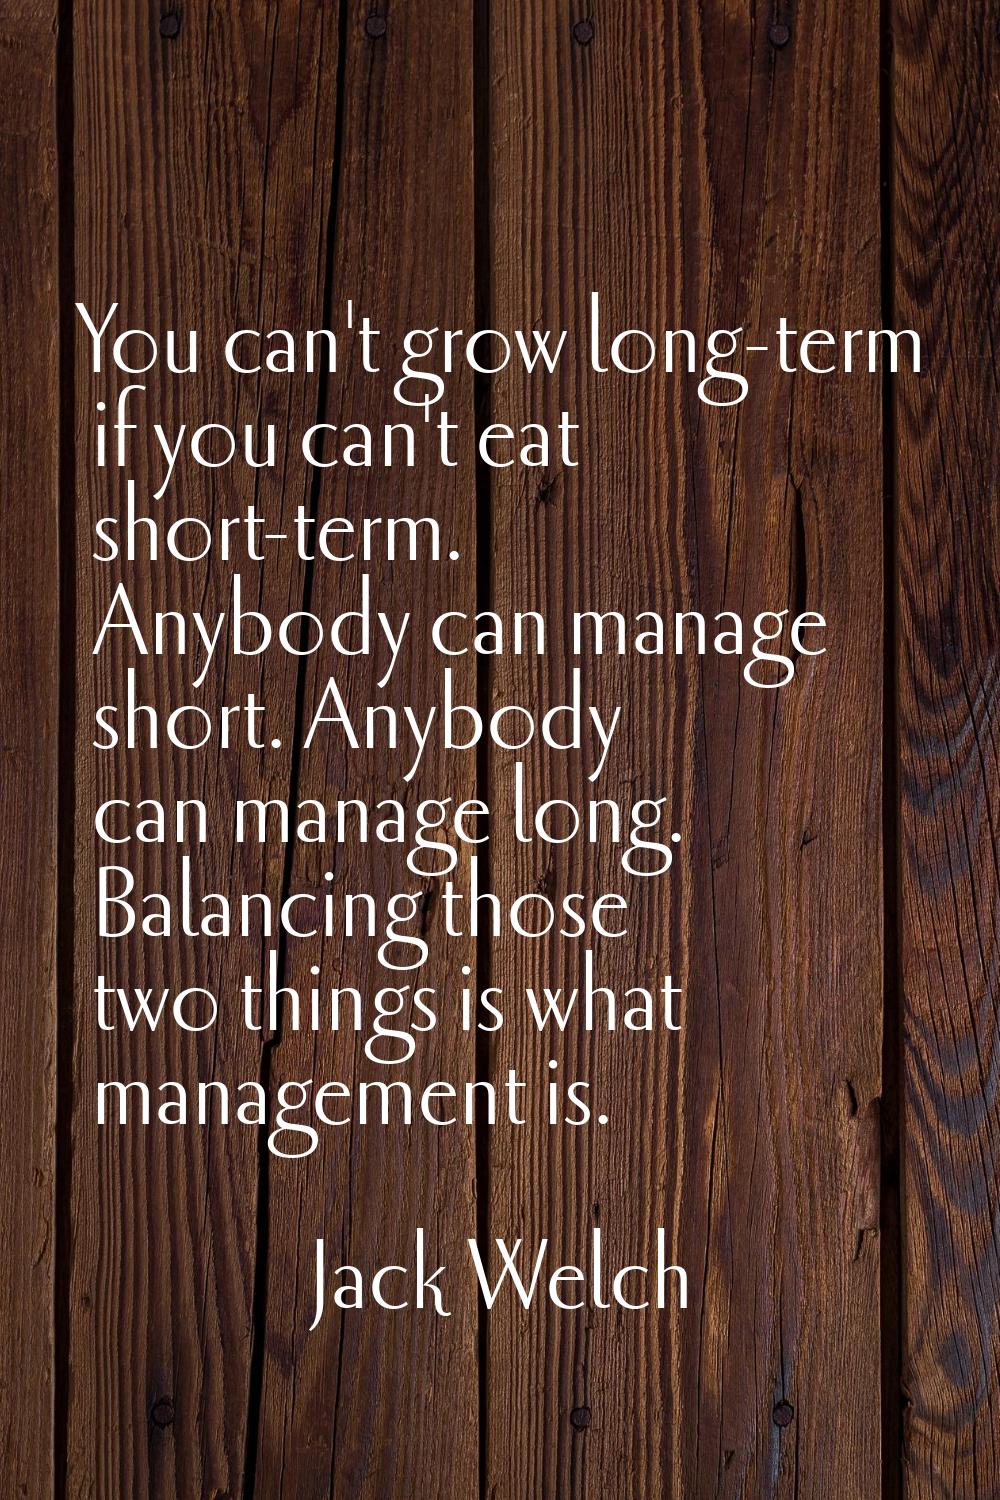 You can't grow long-term if you can't eat short-term. Anybody can manage short. Anybody can manage 